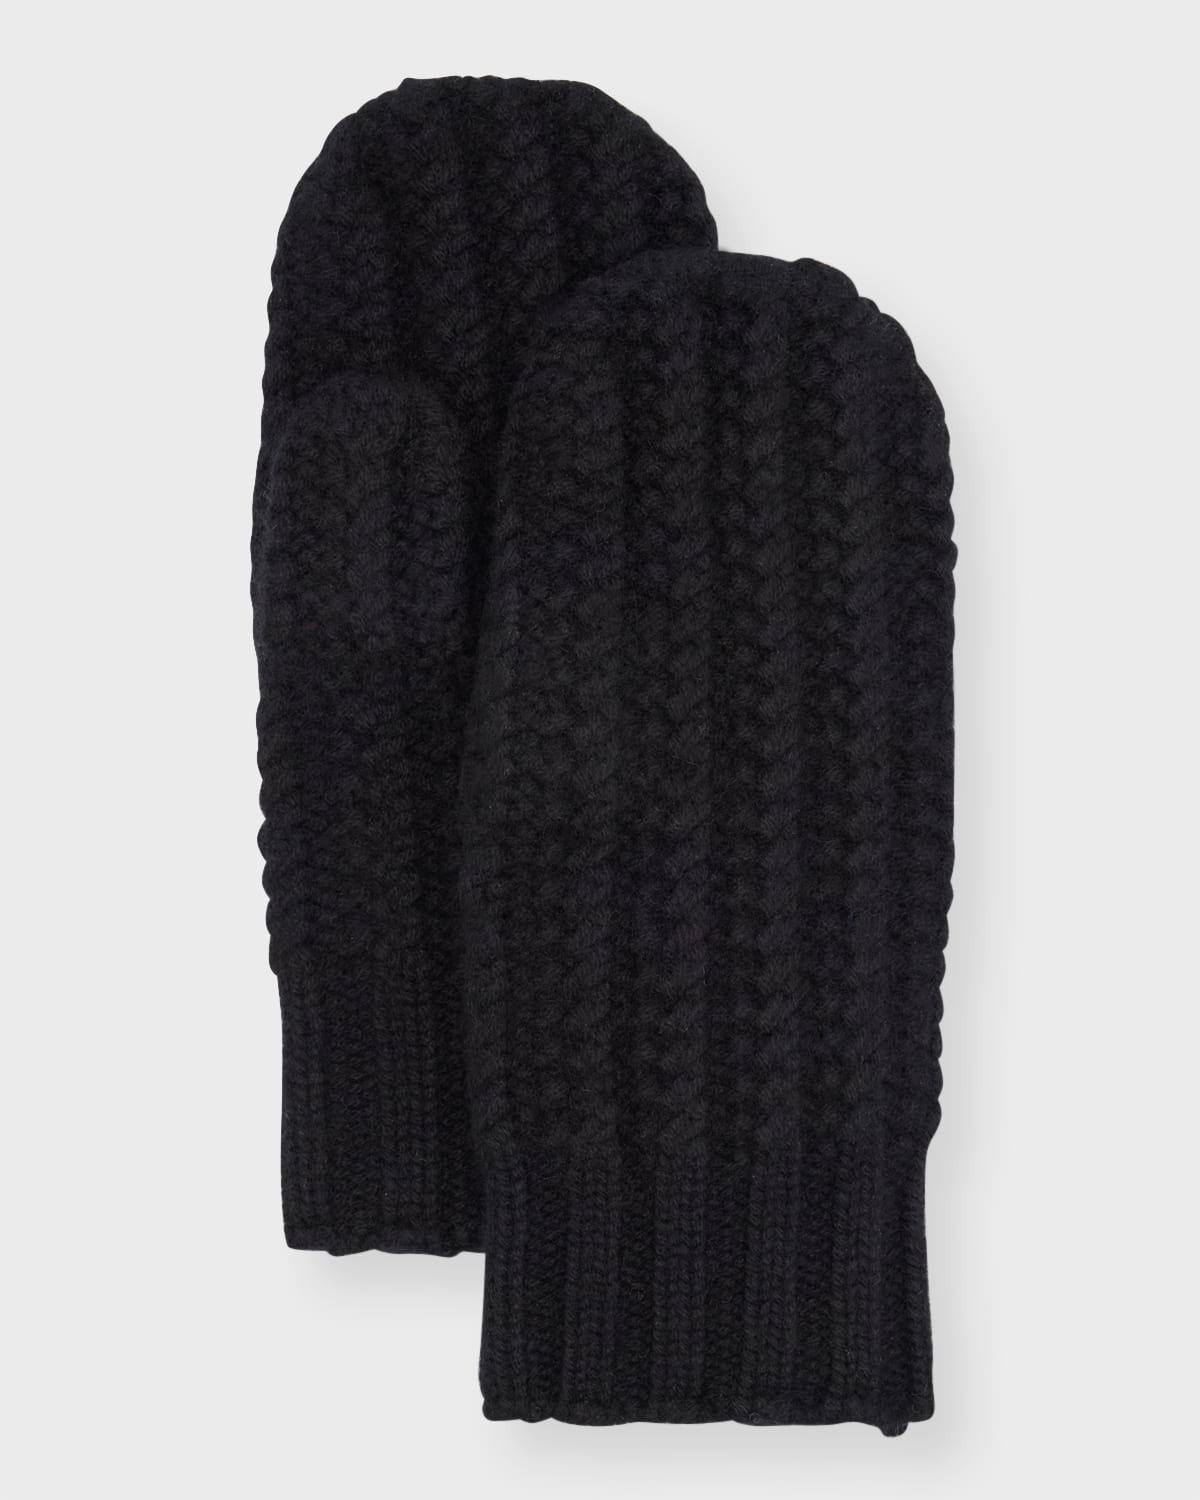 Sofia Cashmere Chunky Textured Cashmere Mittens In Black